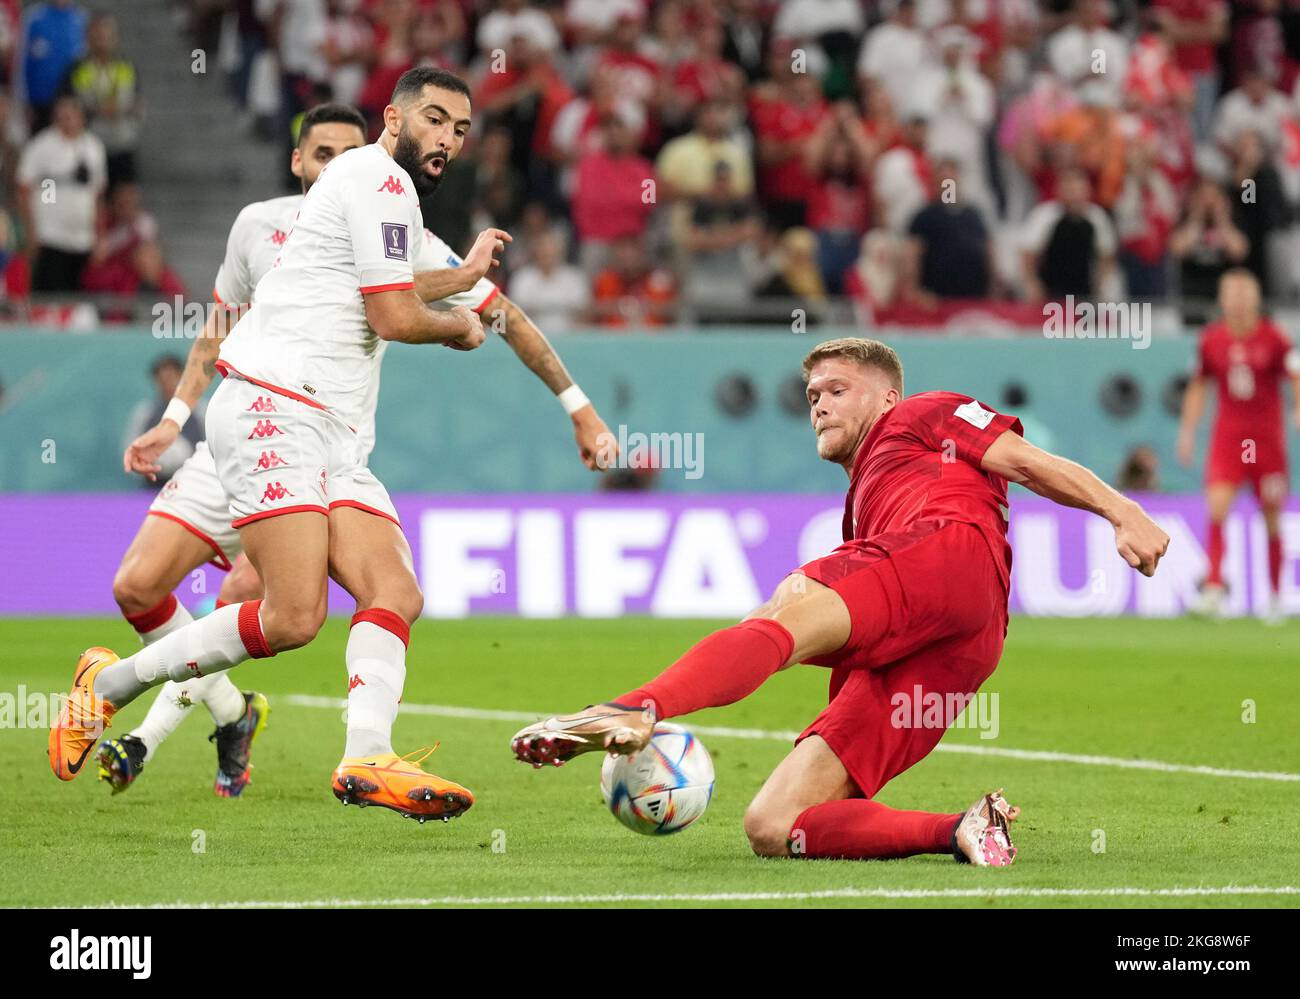 Al Rayyan, Qatar. 22nd Nov, 2022. Andreas Cornelius (R) of Denmark vies with Yassine Meriah of Tunisia during the Group D match between Denmark and Tunisia at the 2022 FIFA World Cup at Education City Stadium in Al Rayyan, Qatar, Nov. 22, 2022. Credit: Zheng Huansong/Xinhua/Alamy Live News Stock Photo